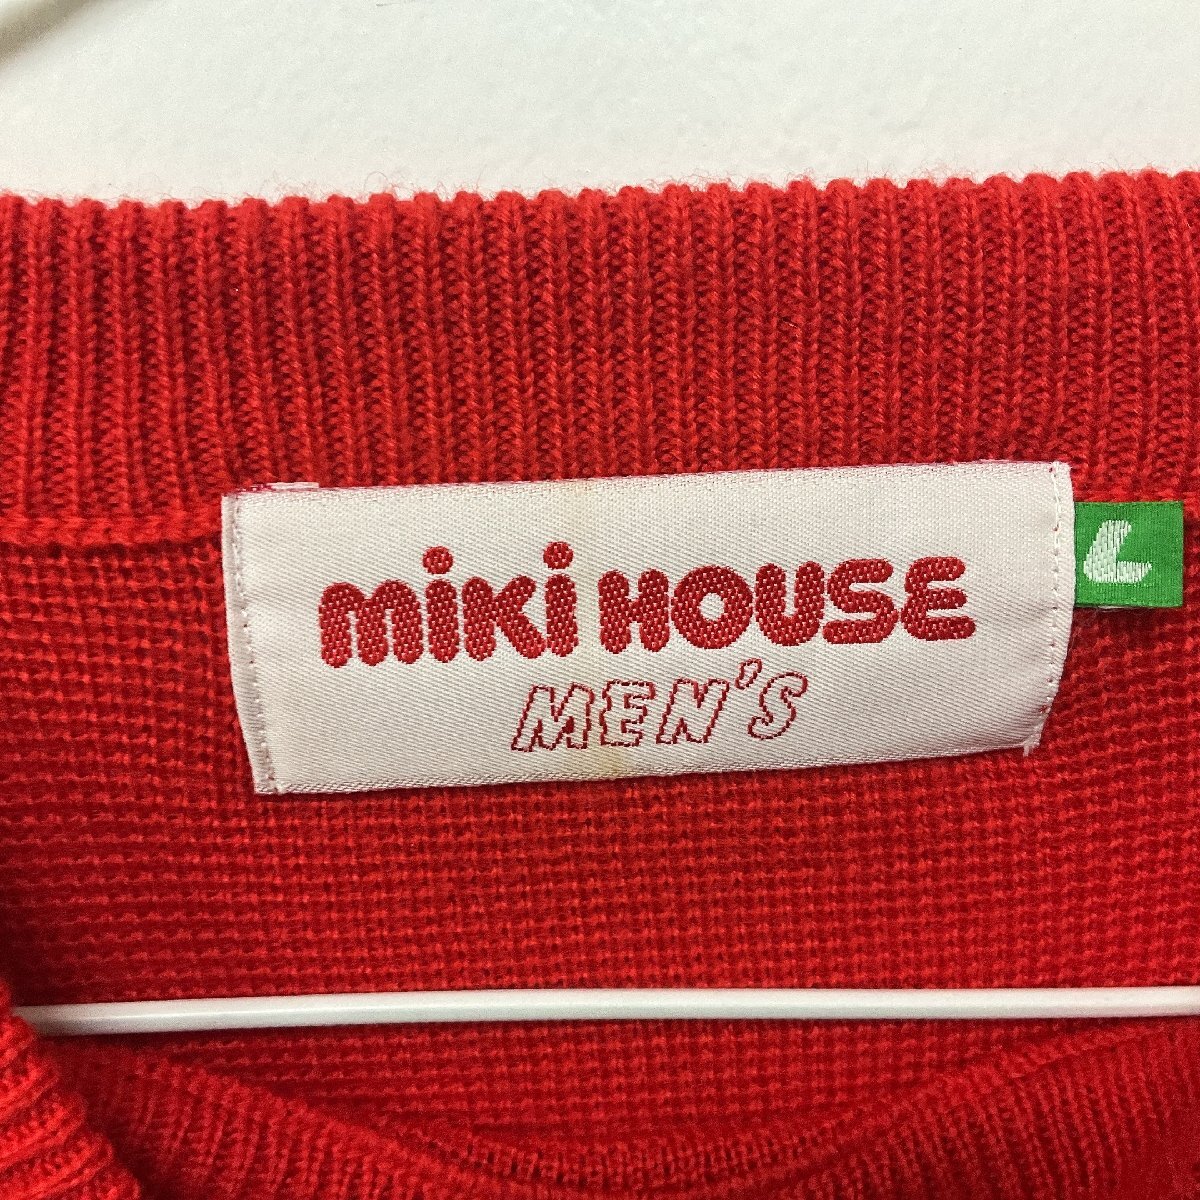 *1 jpy start men's old clothes miki HOUSE MEN\'S sweater knitted tops Miki House 